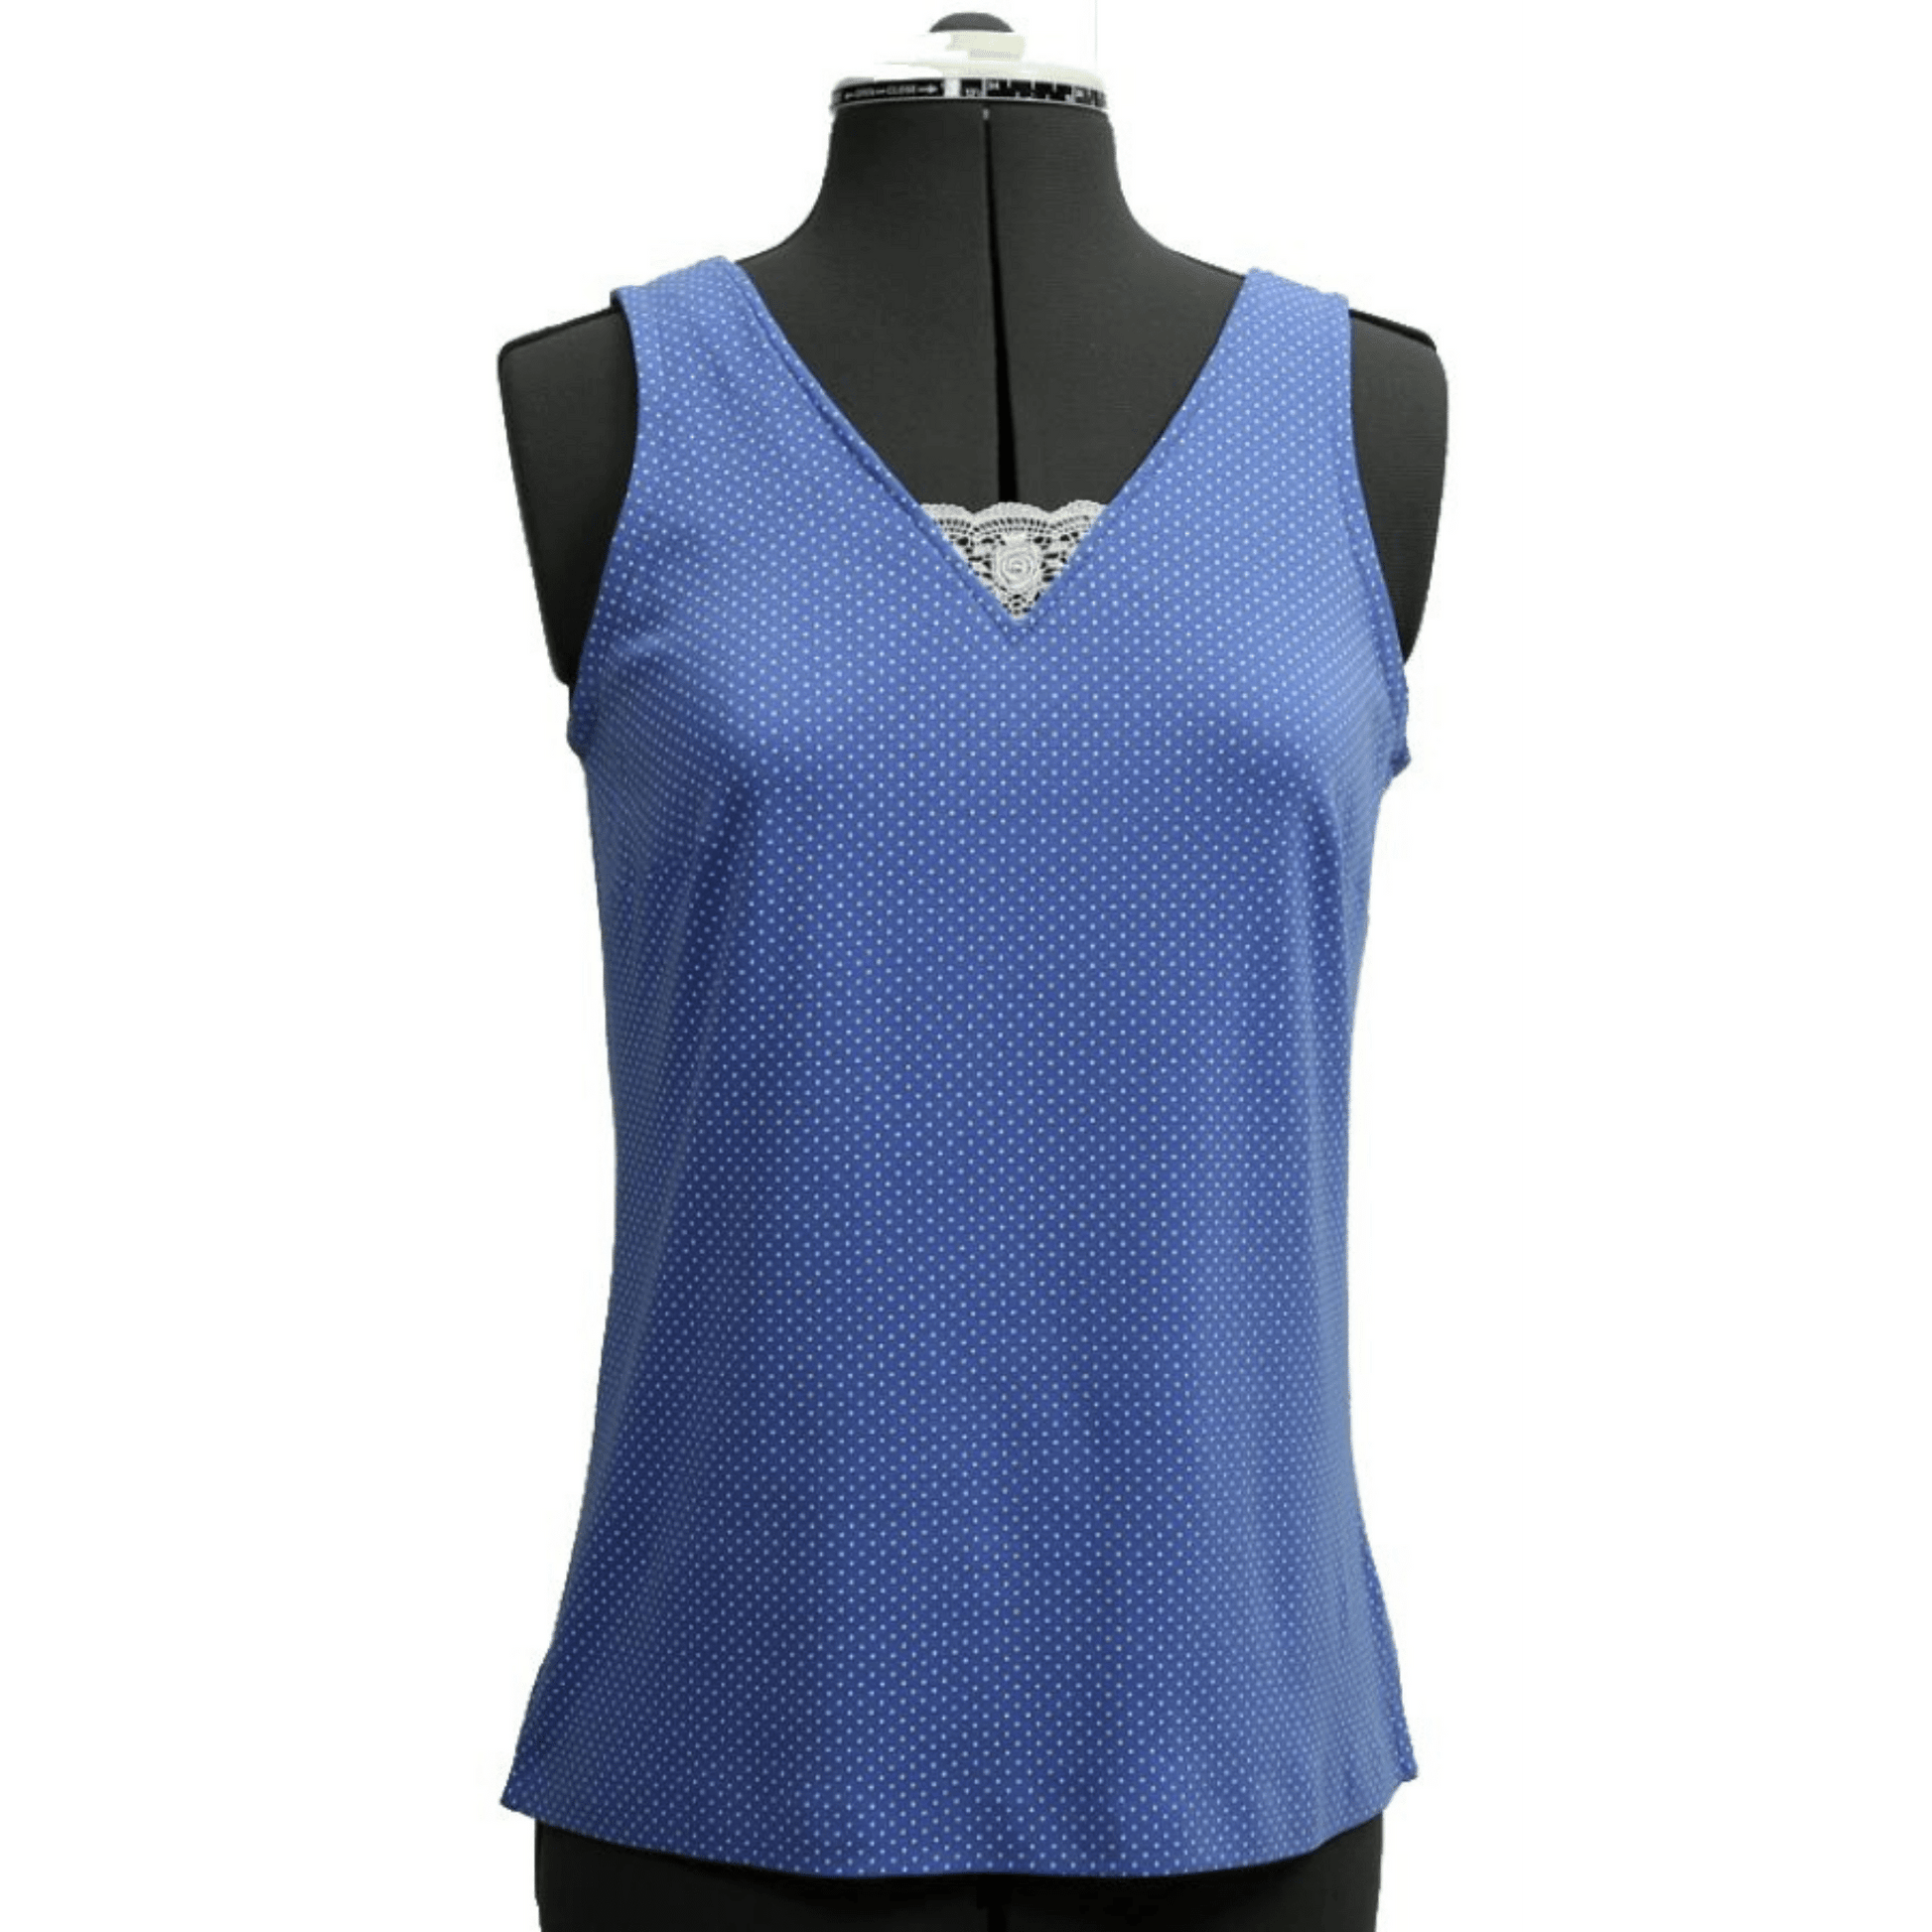 A blue tank top on a mannequin